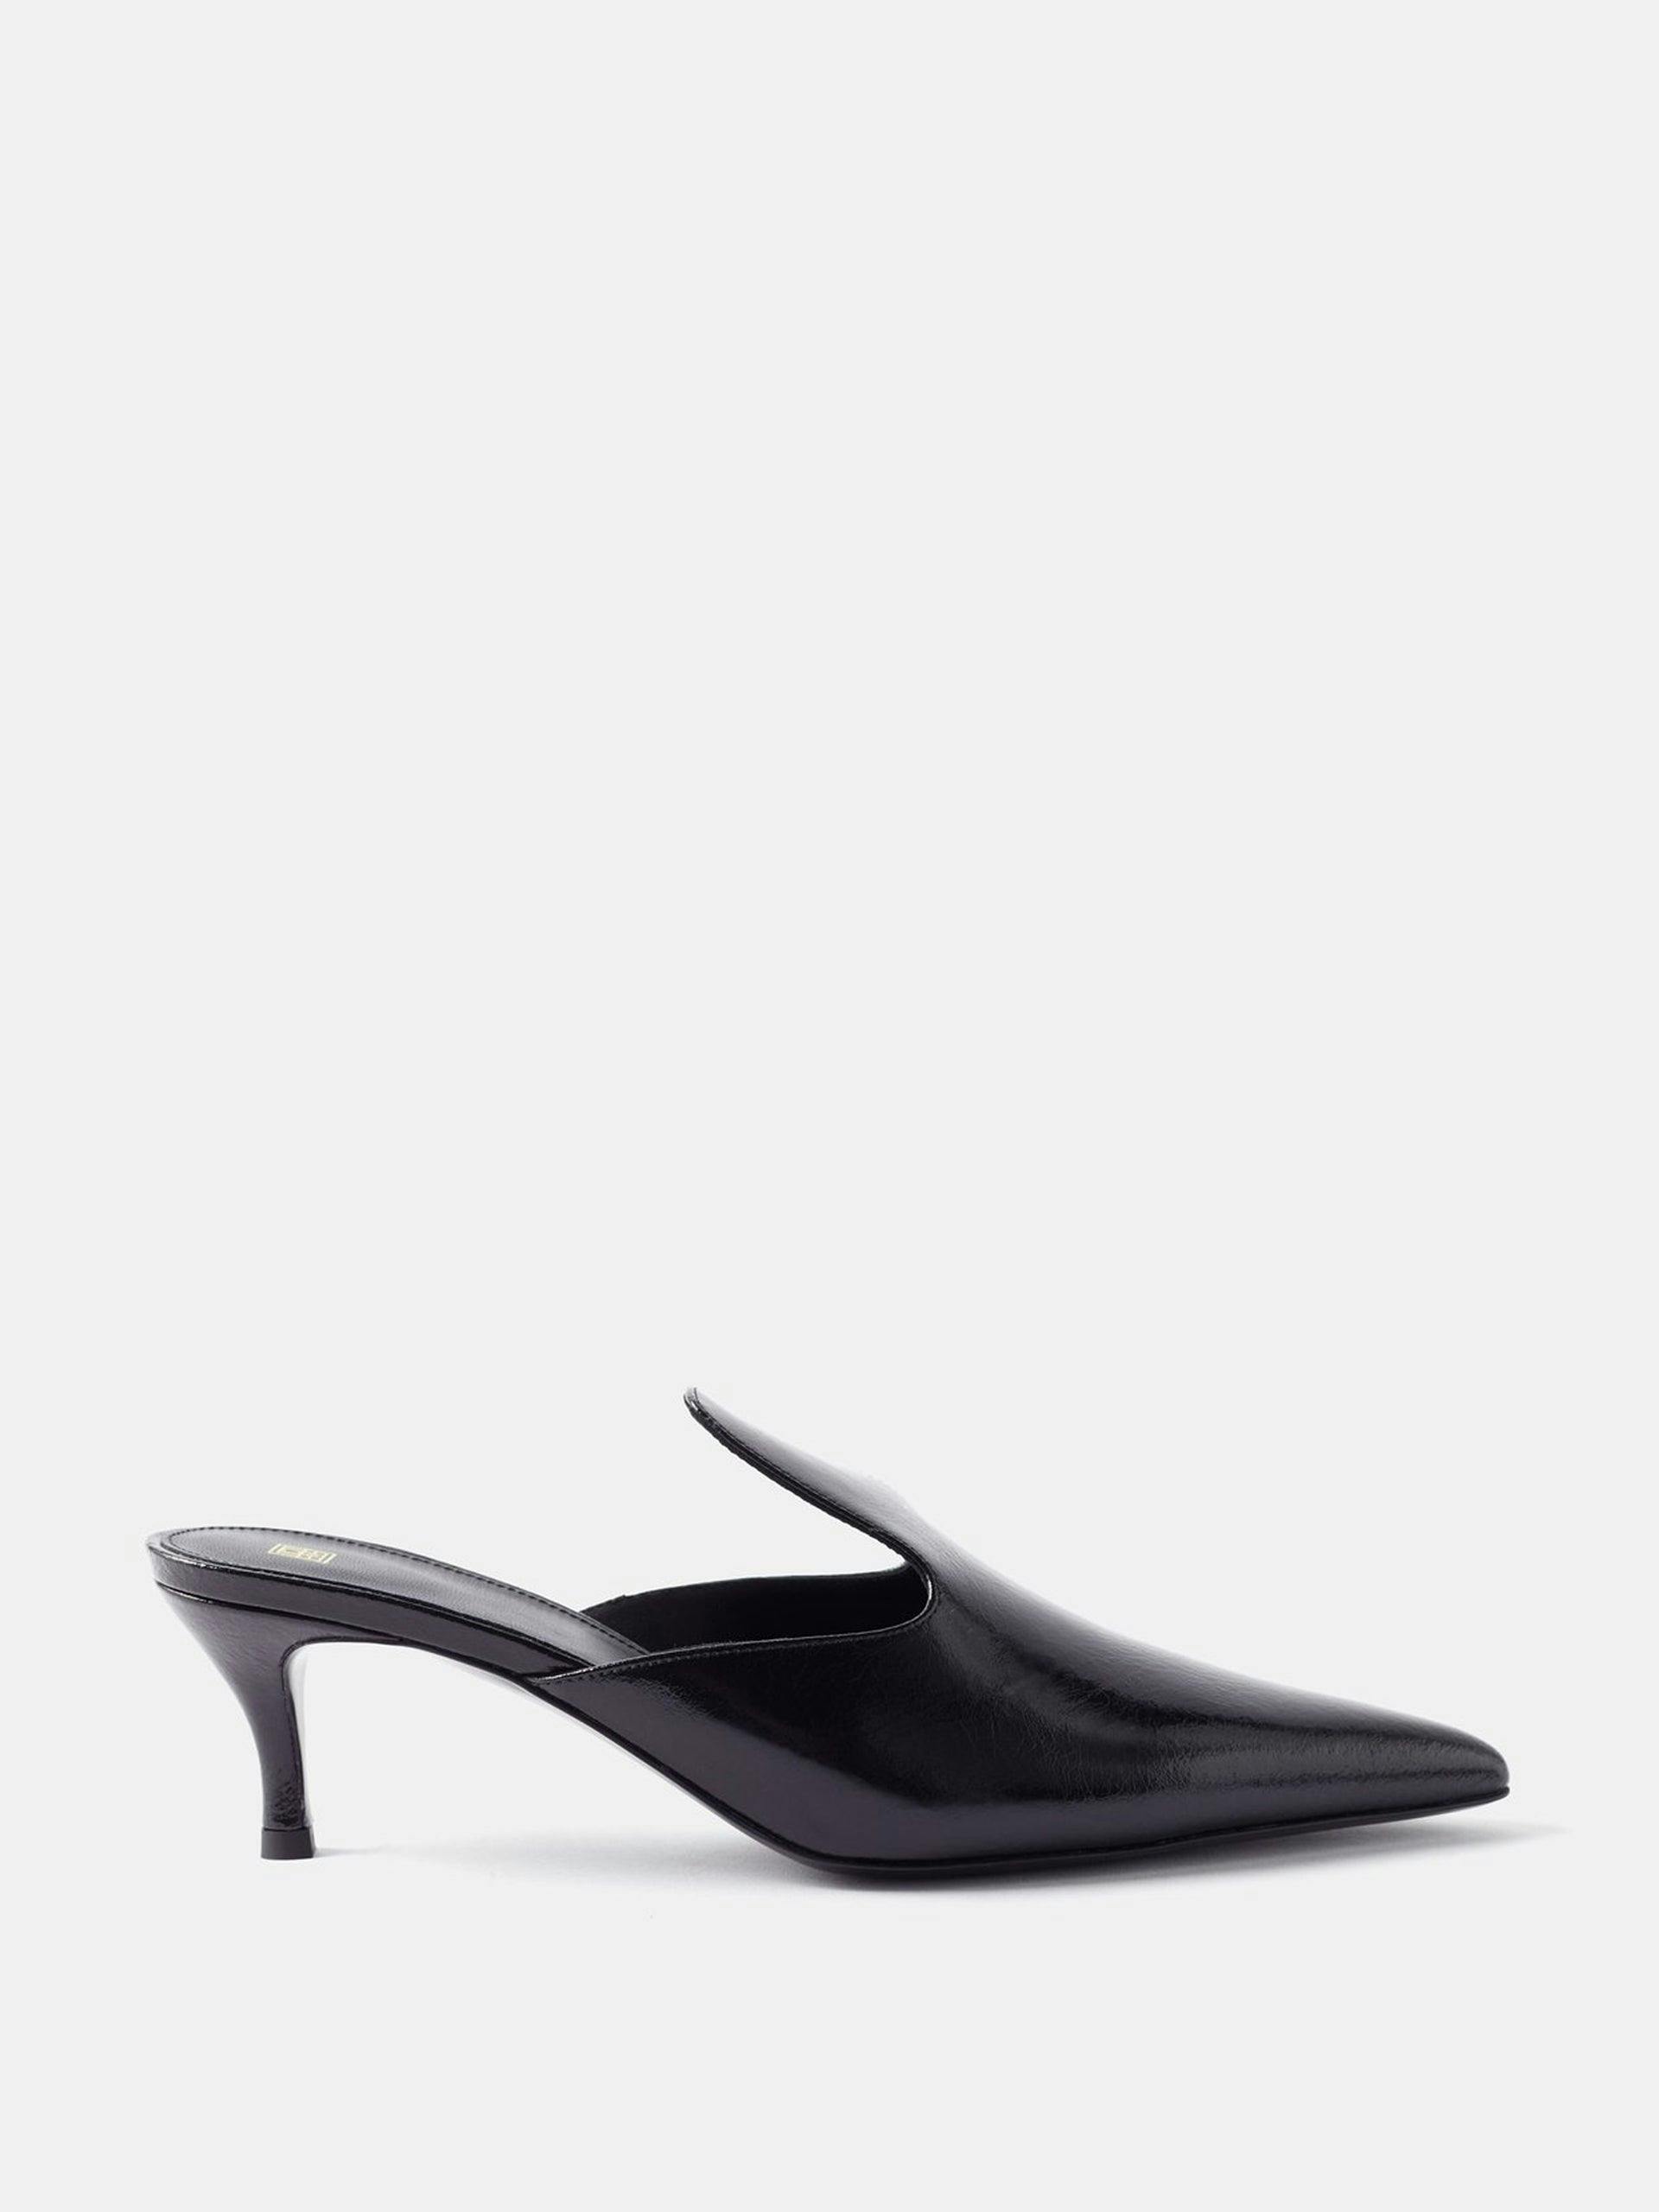 The Pencil patent leather mules